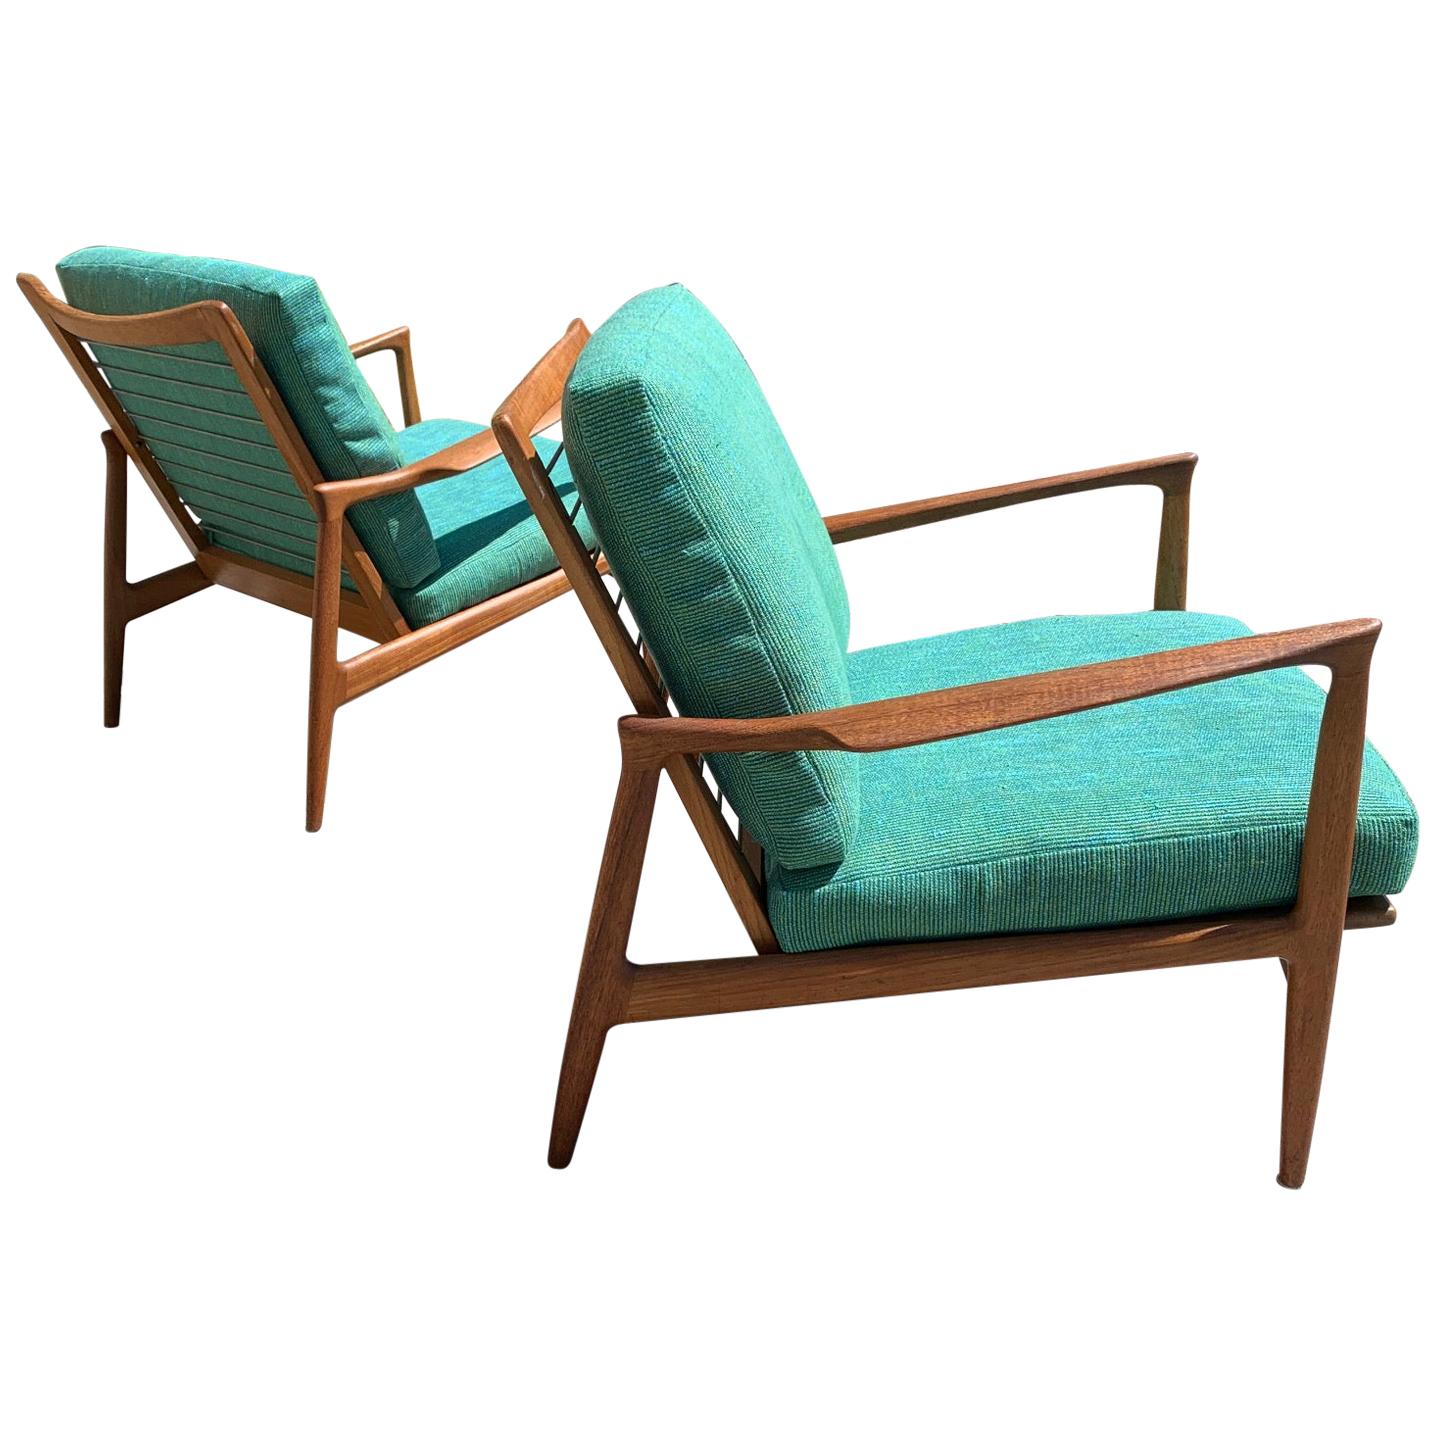 Pair of Kofod Larsen Teak Lounge Chairs Imported by Selig